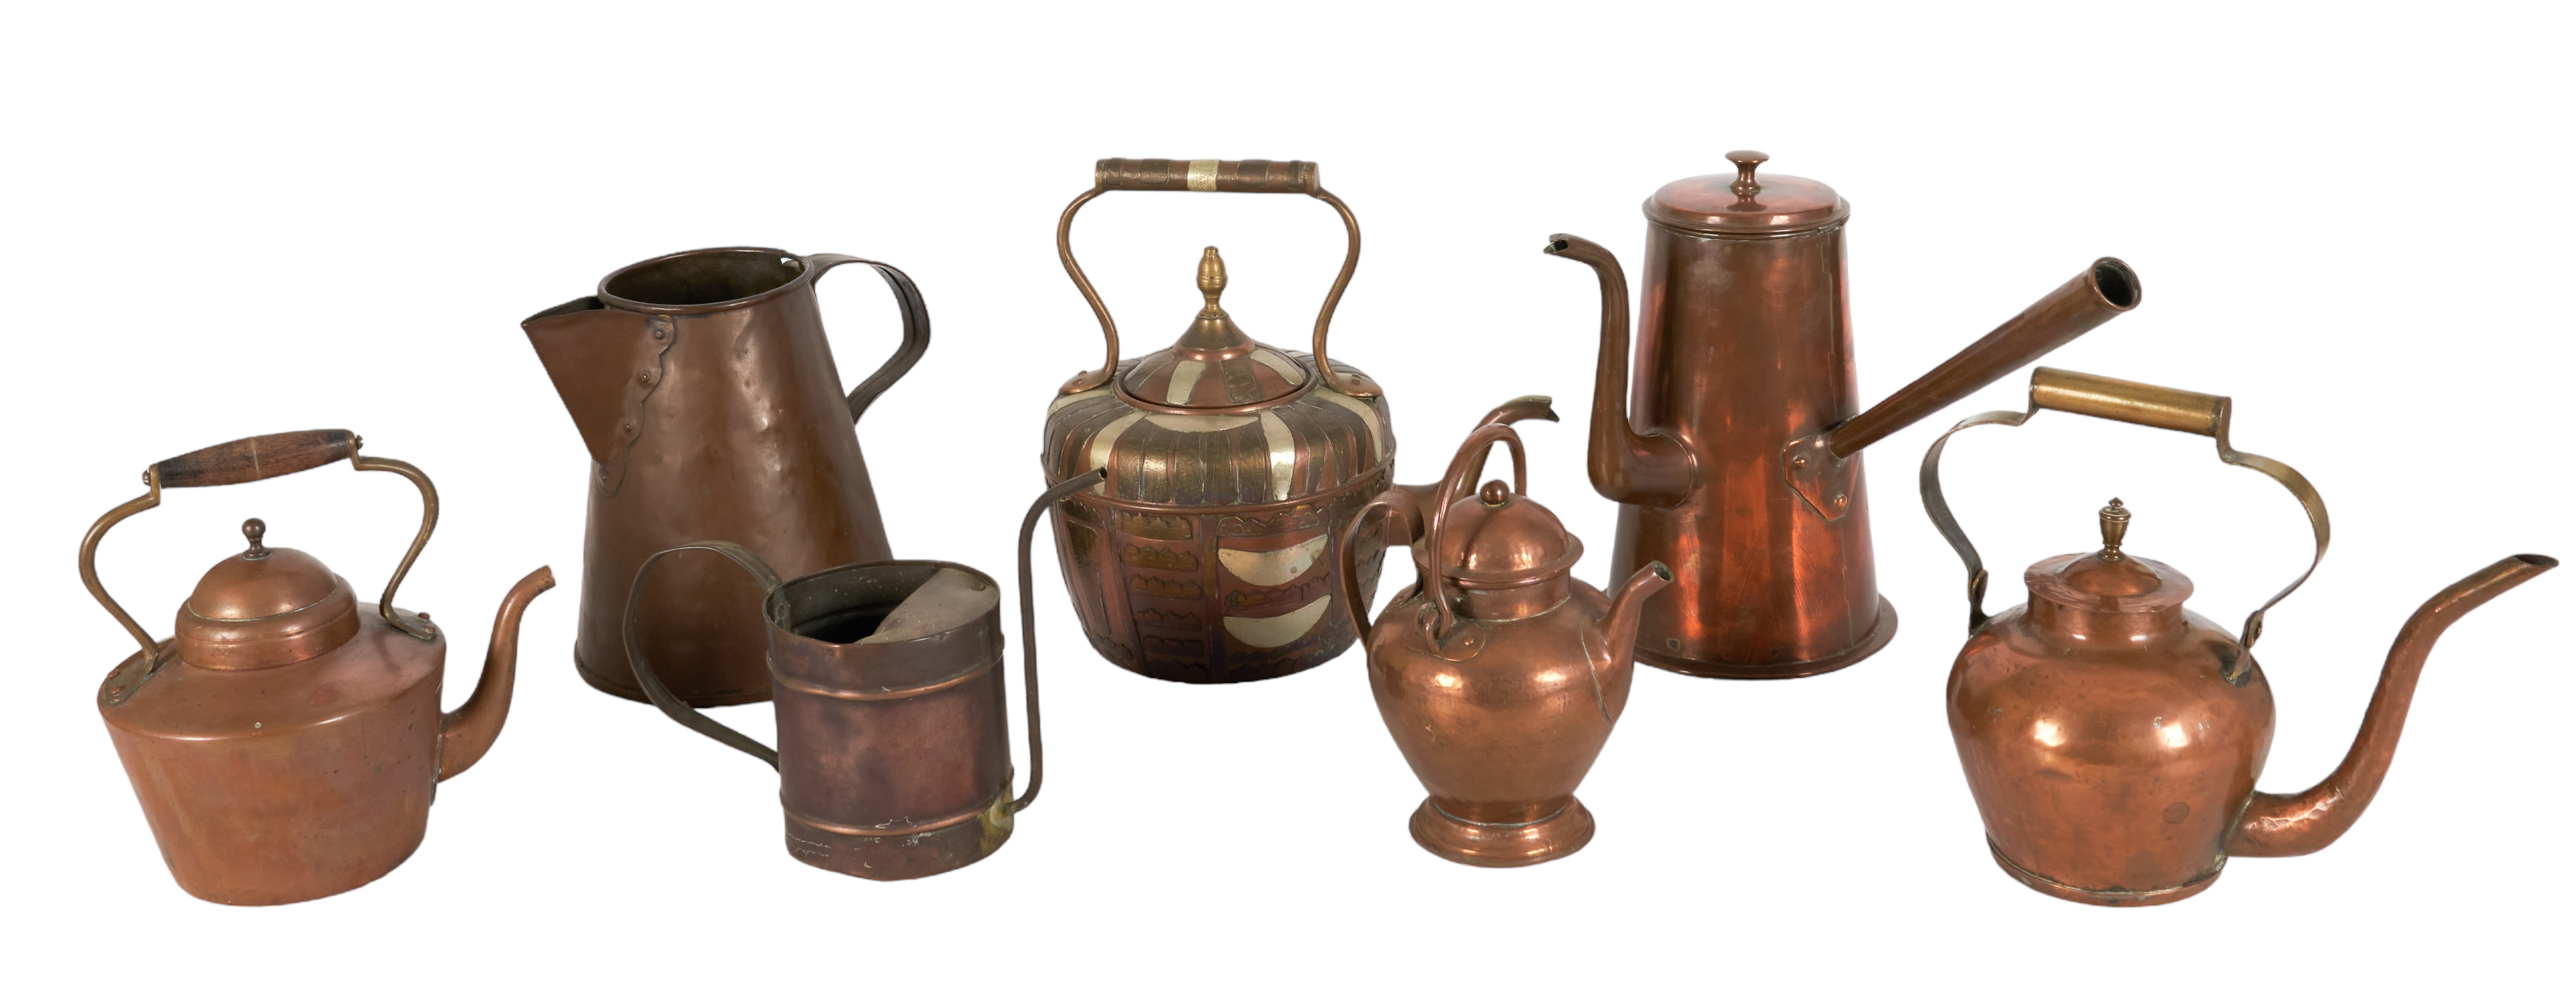  7 Copper and Mixed Metal Pitchers 2e2461